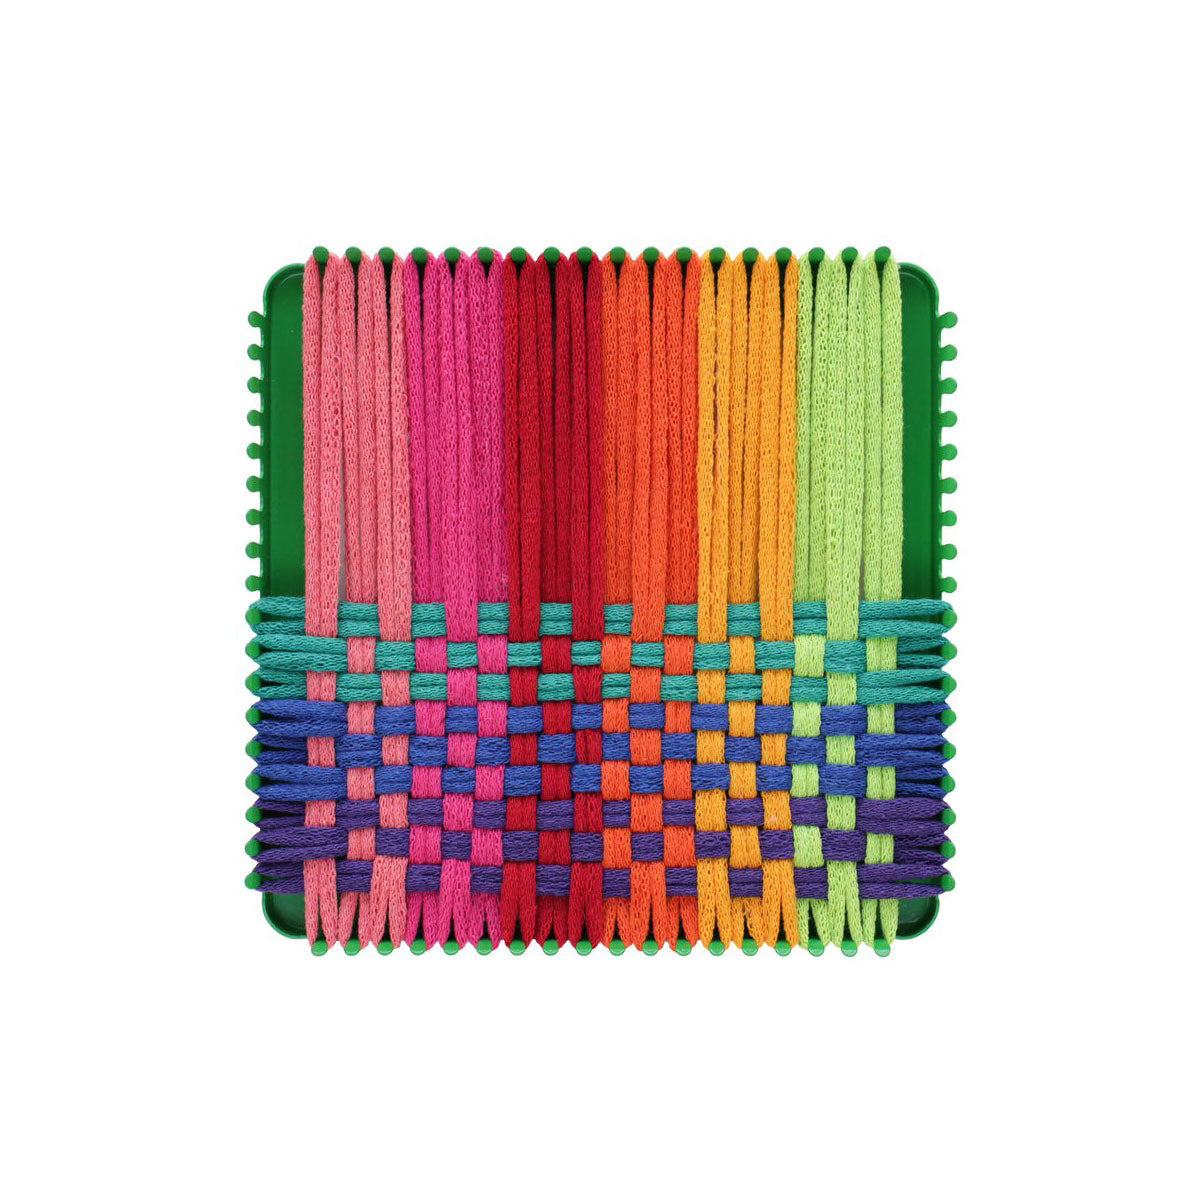 Harrisville Designs Friendly Loom Potholder Deluxe Loom - 7” Traditional Size